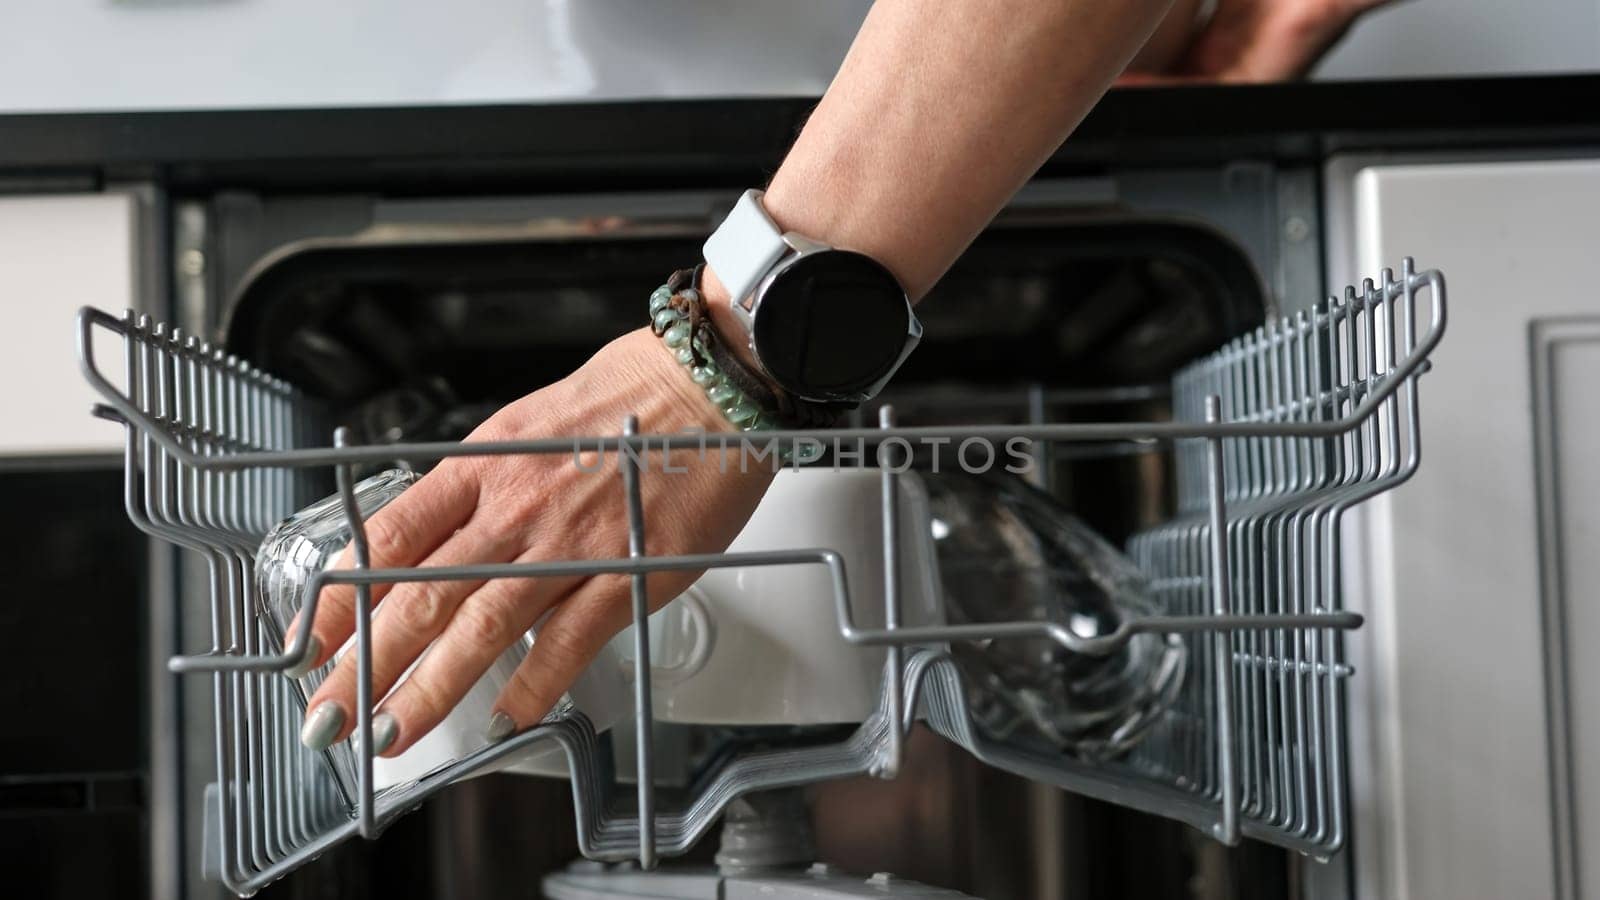 Girl Takes Clean Plate From Dishwasher by tan4ikk1